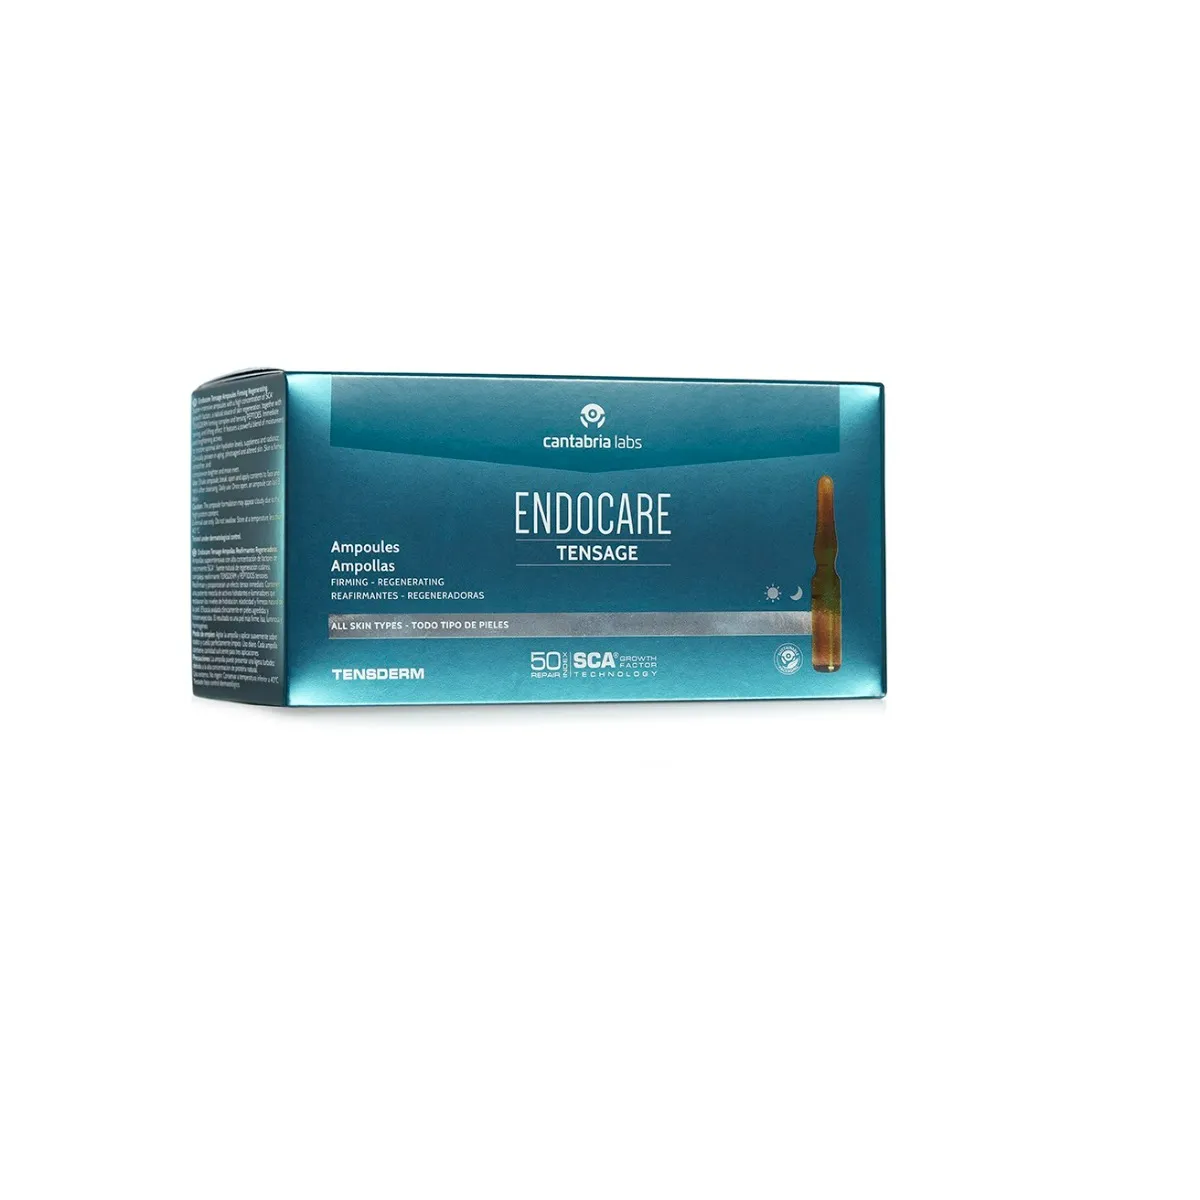 Endocare Tensage Ampolle 10 Fiale x 2